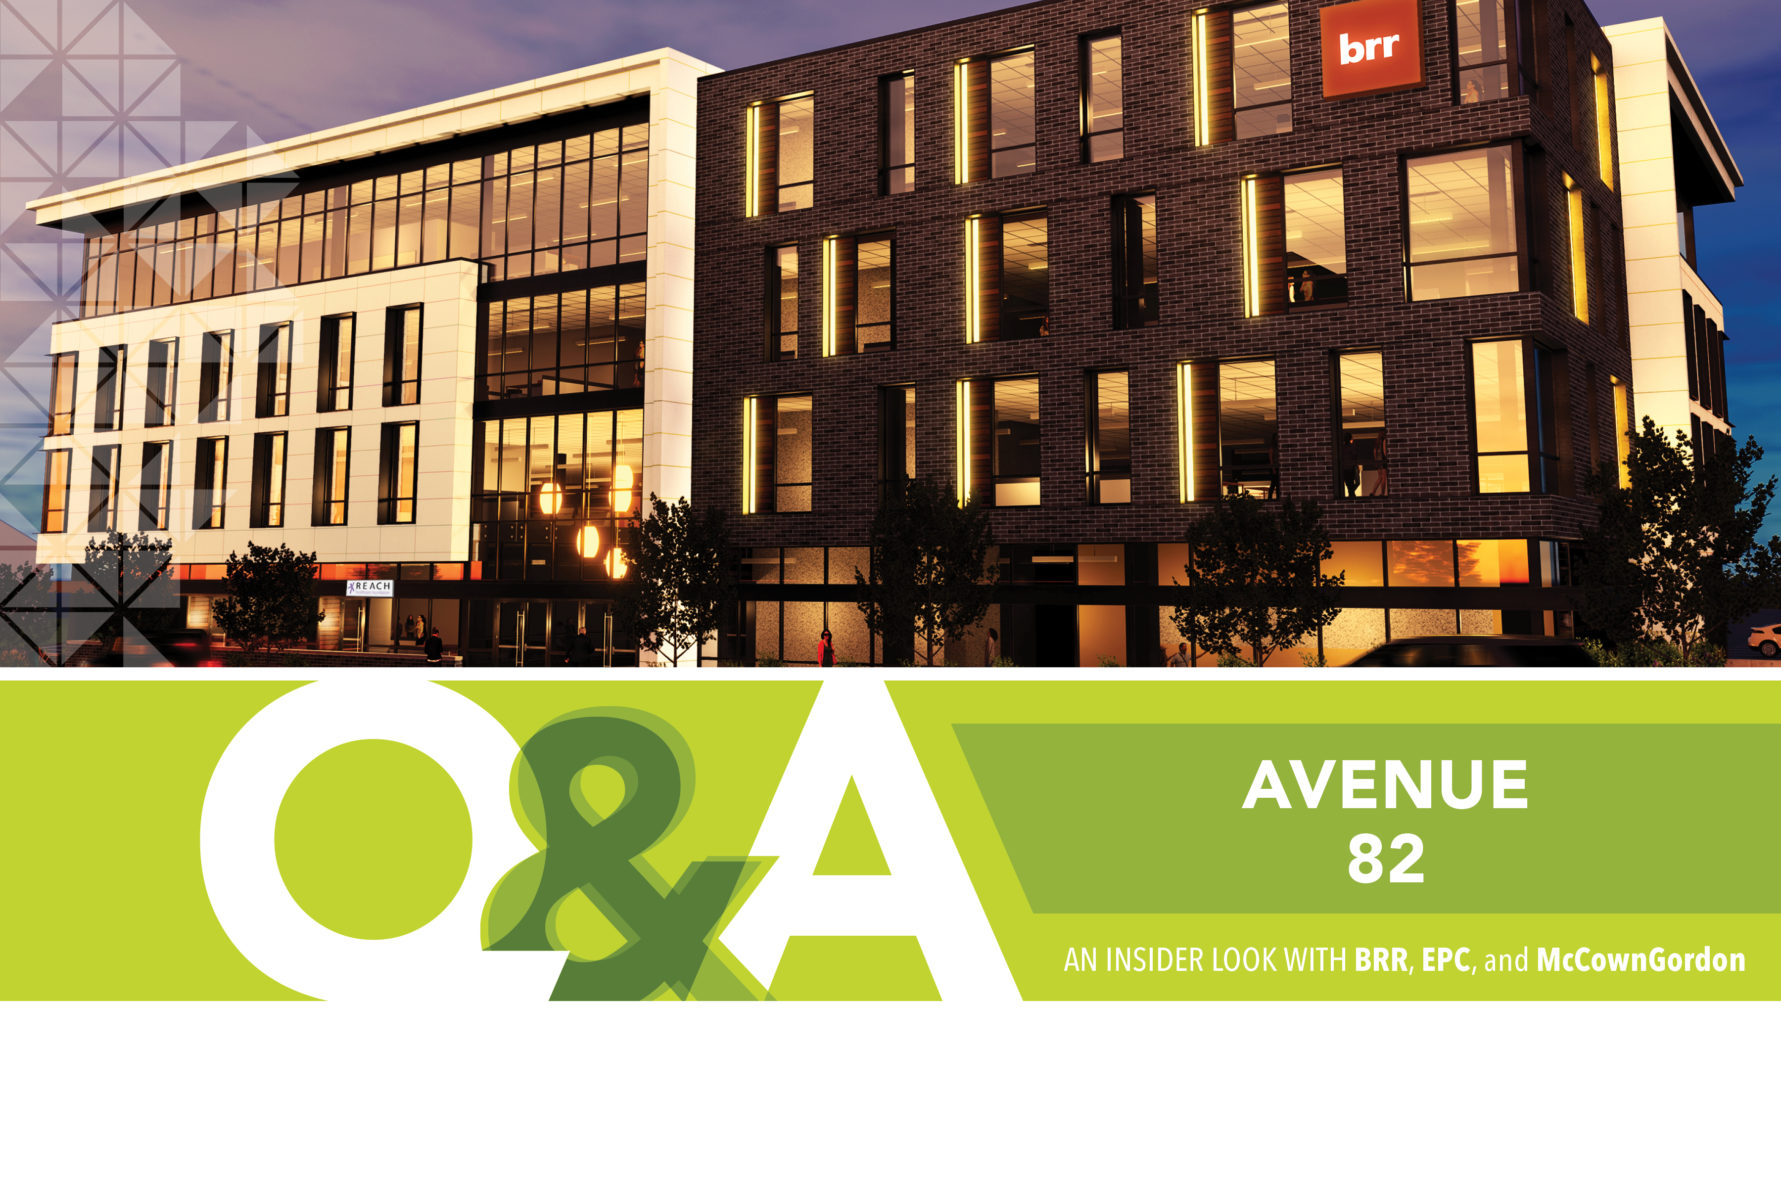 Q&A on Avenue 83 and BRR